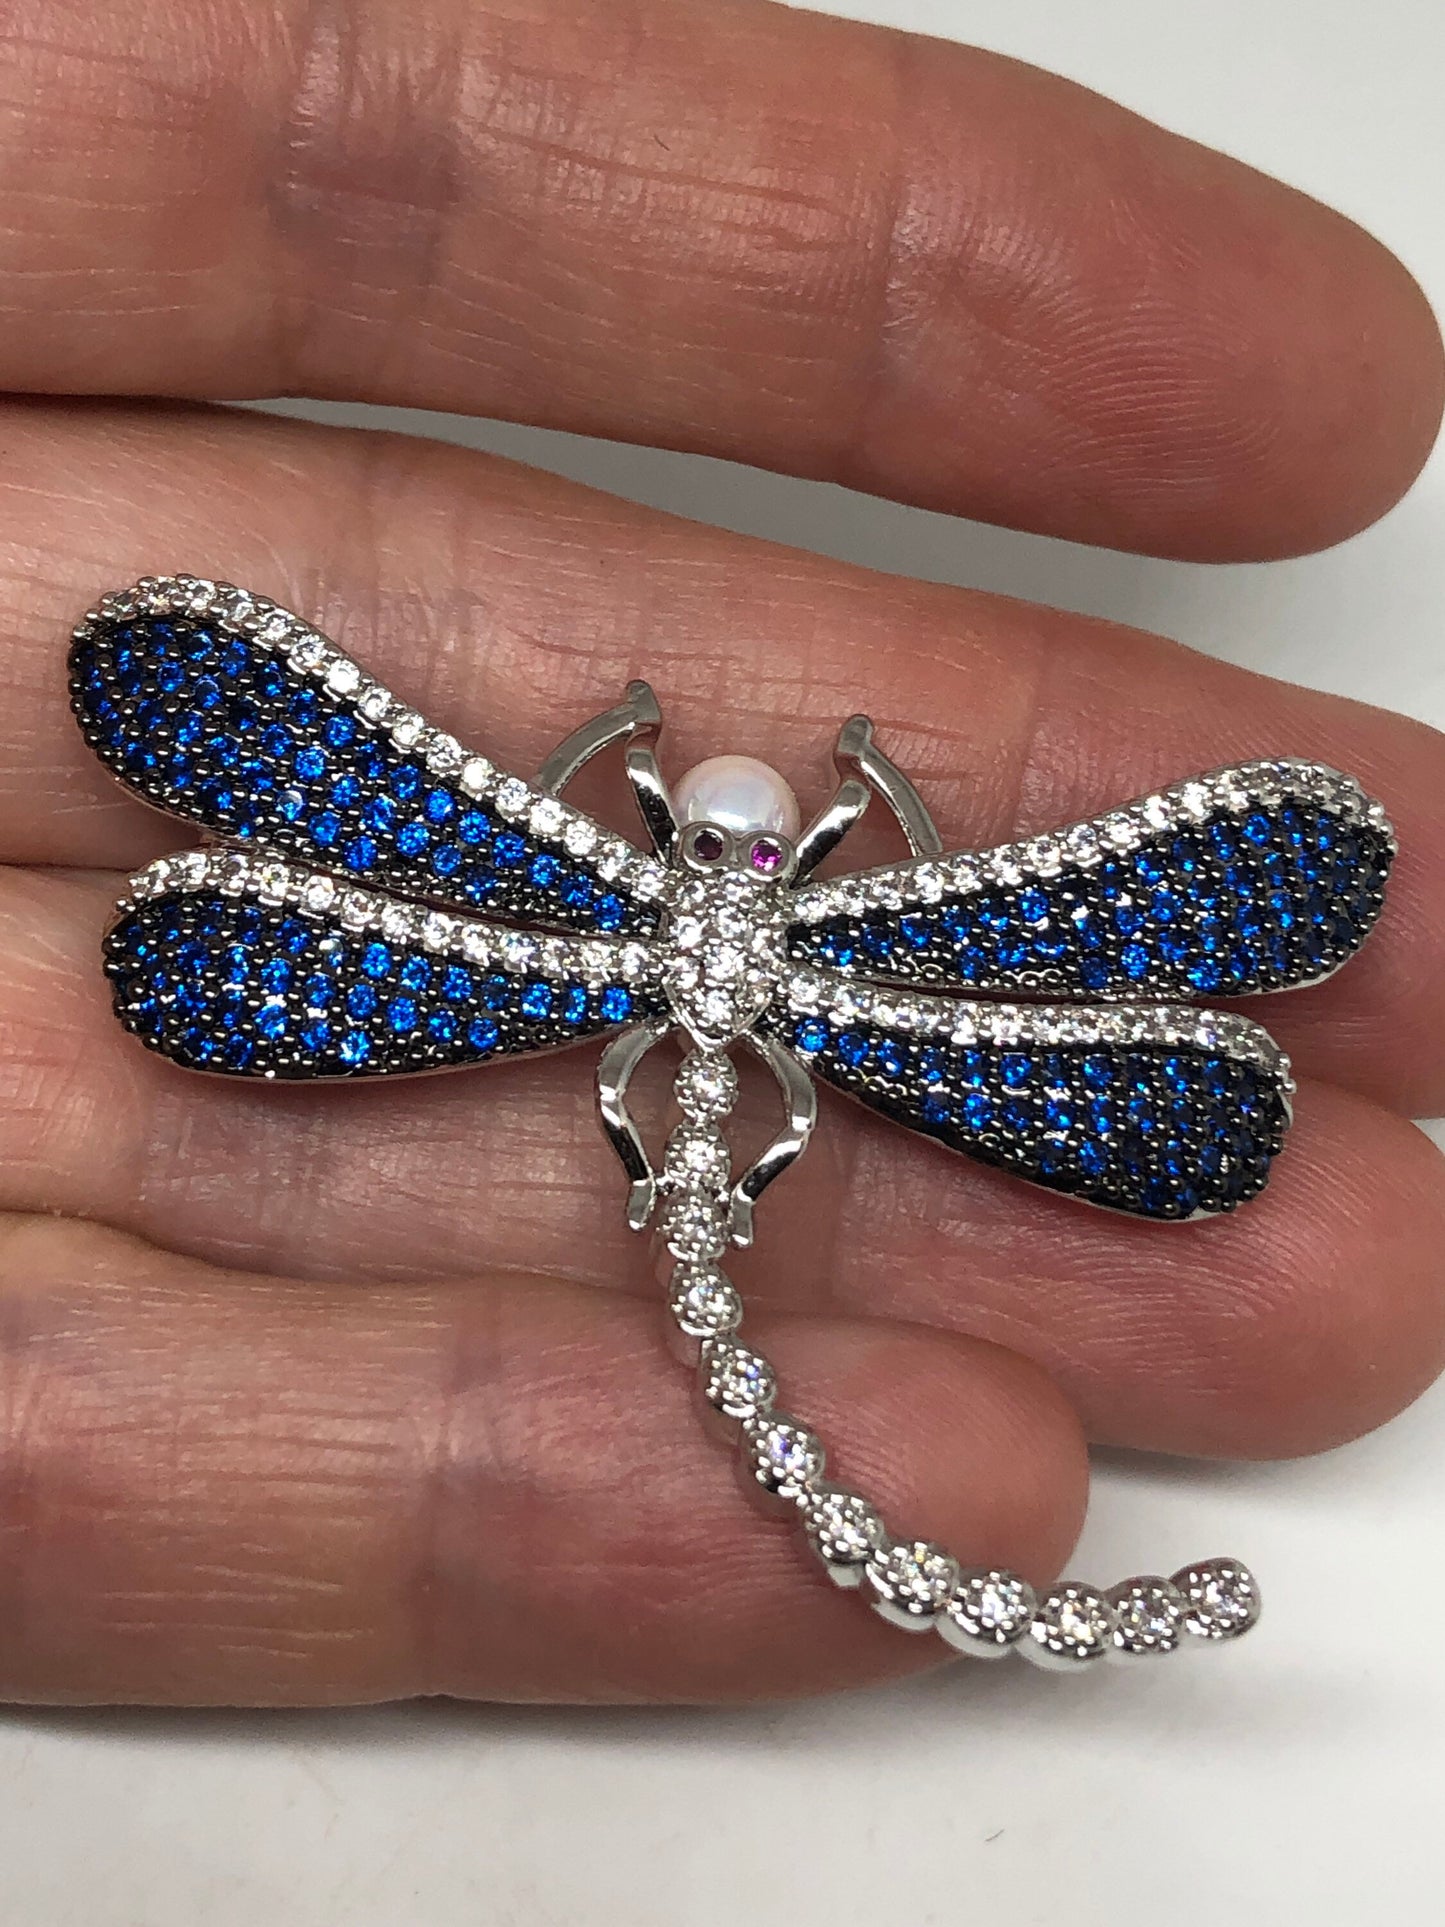 Vintage Blue Crystal Gothic Styled Silver Finished Dragonfly Necklace Broach